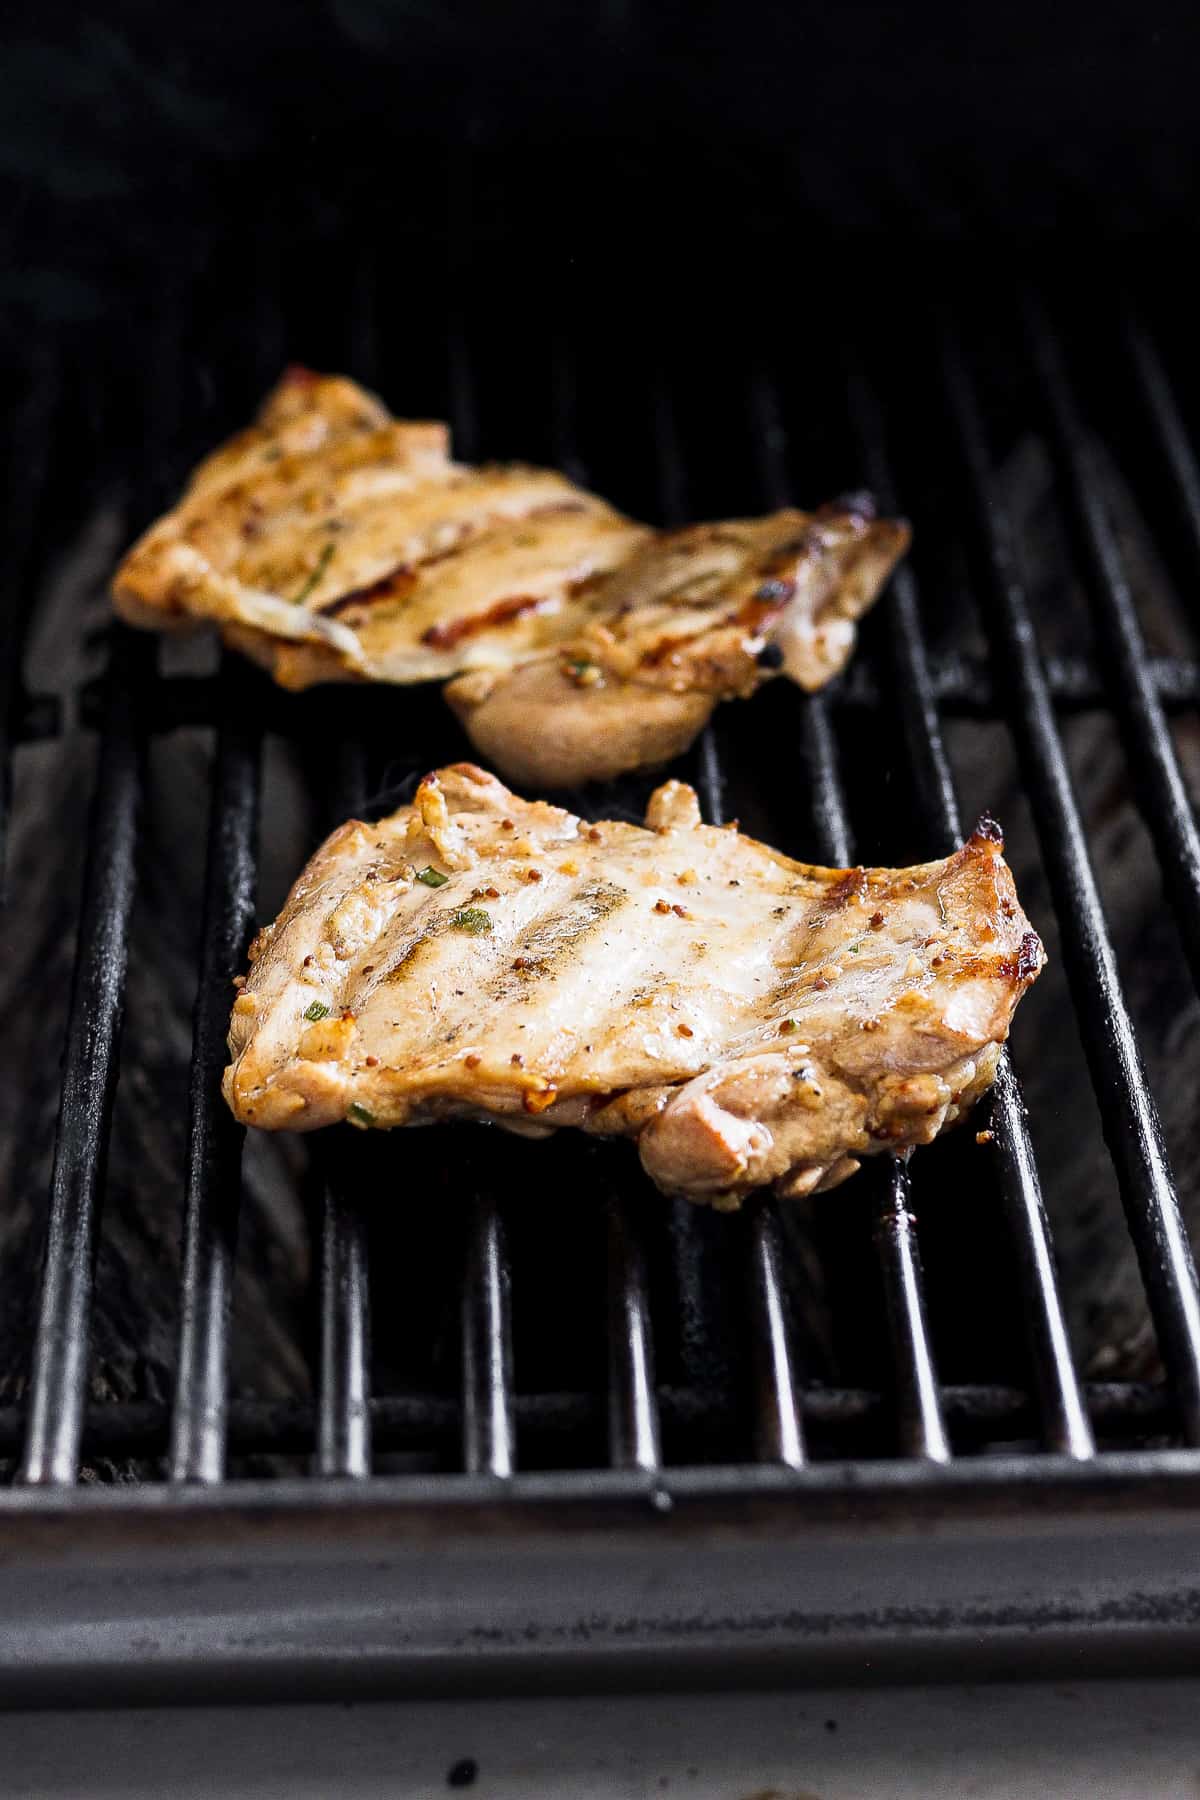 boneless skinless chicken thighs on grill grates.